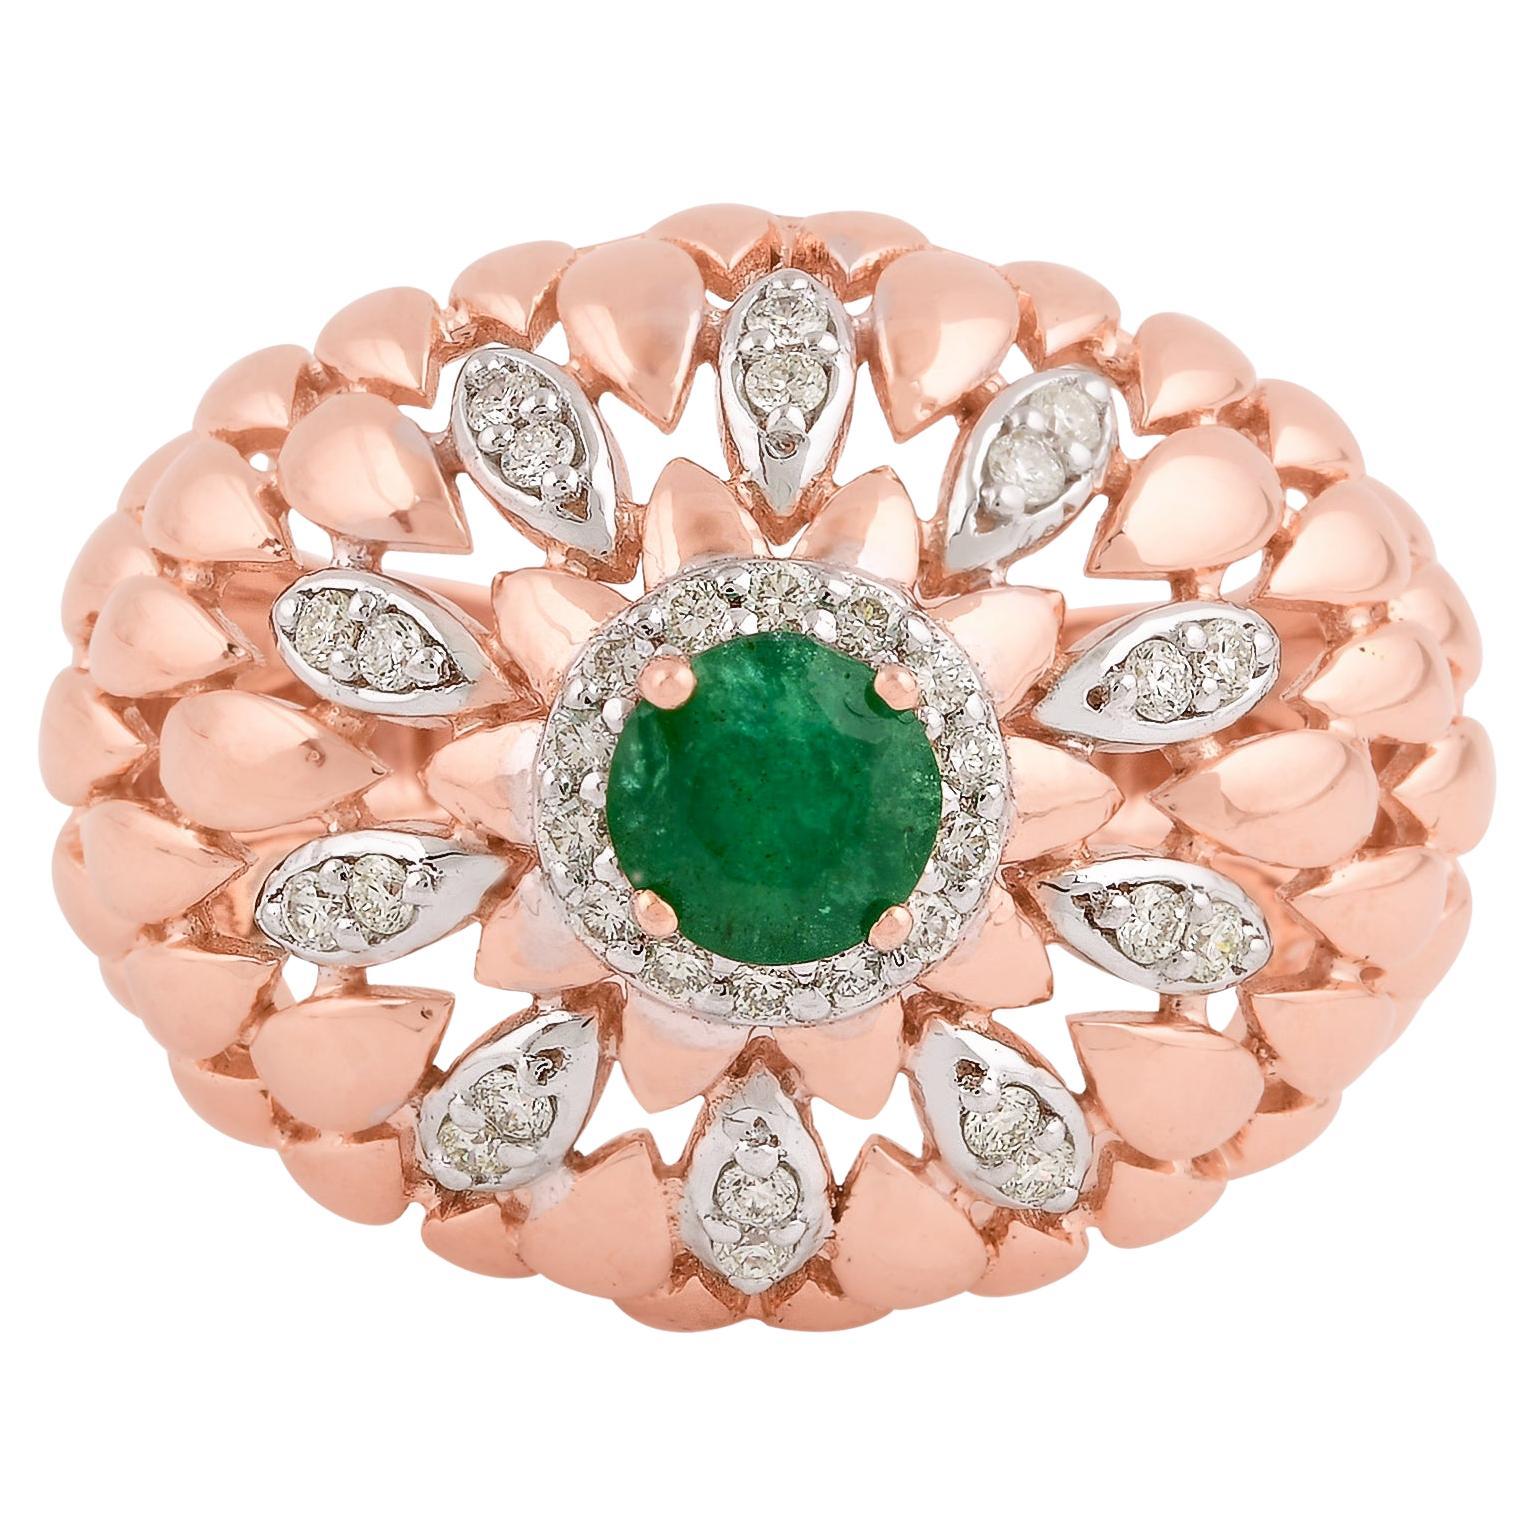 For Sale:  Natural Emerald Gemstone Dome Ring Diamond Pave Solid 18k Rose Gold Fine Jewelry